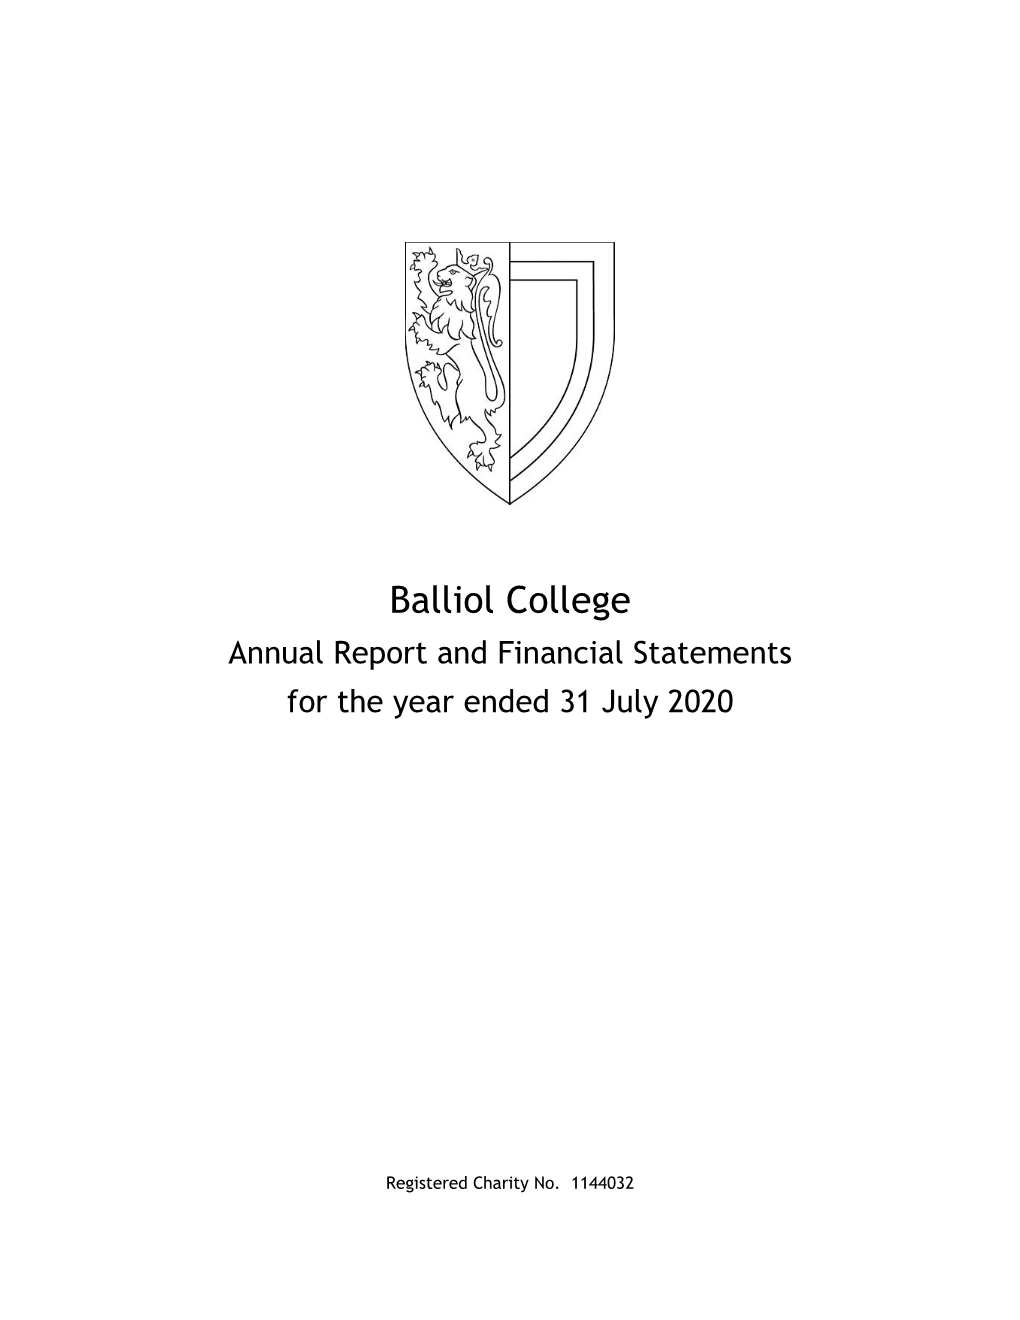 Balliol College Annual Report and Financial Statements for the Year Ended 31 July 2020